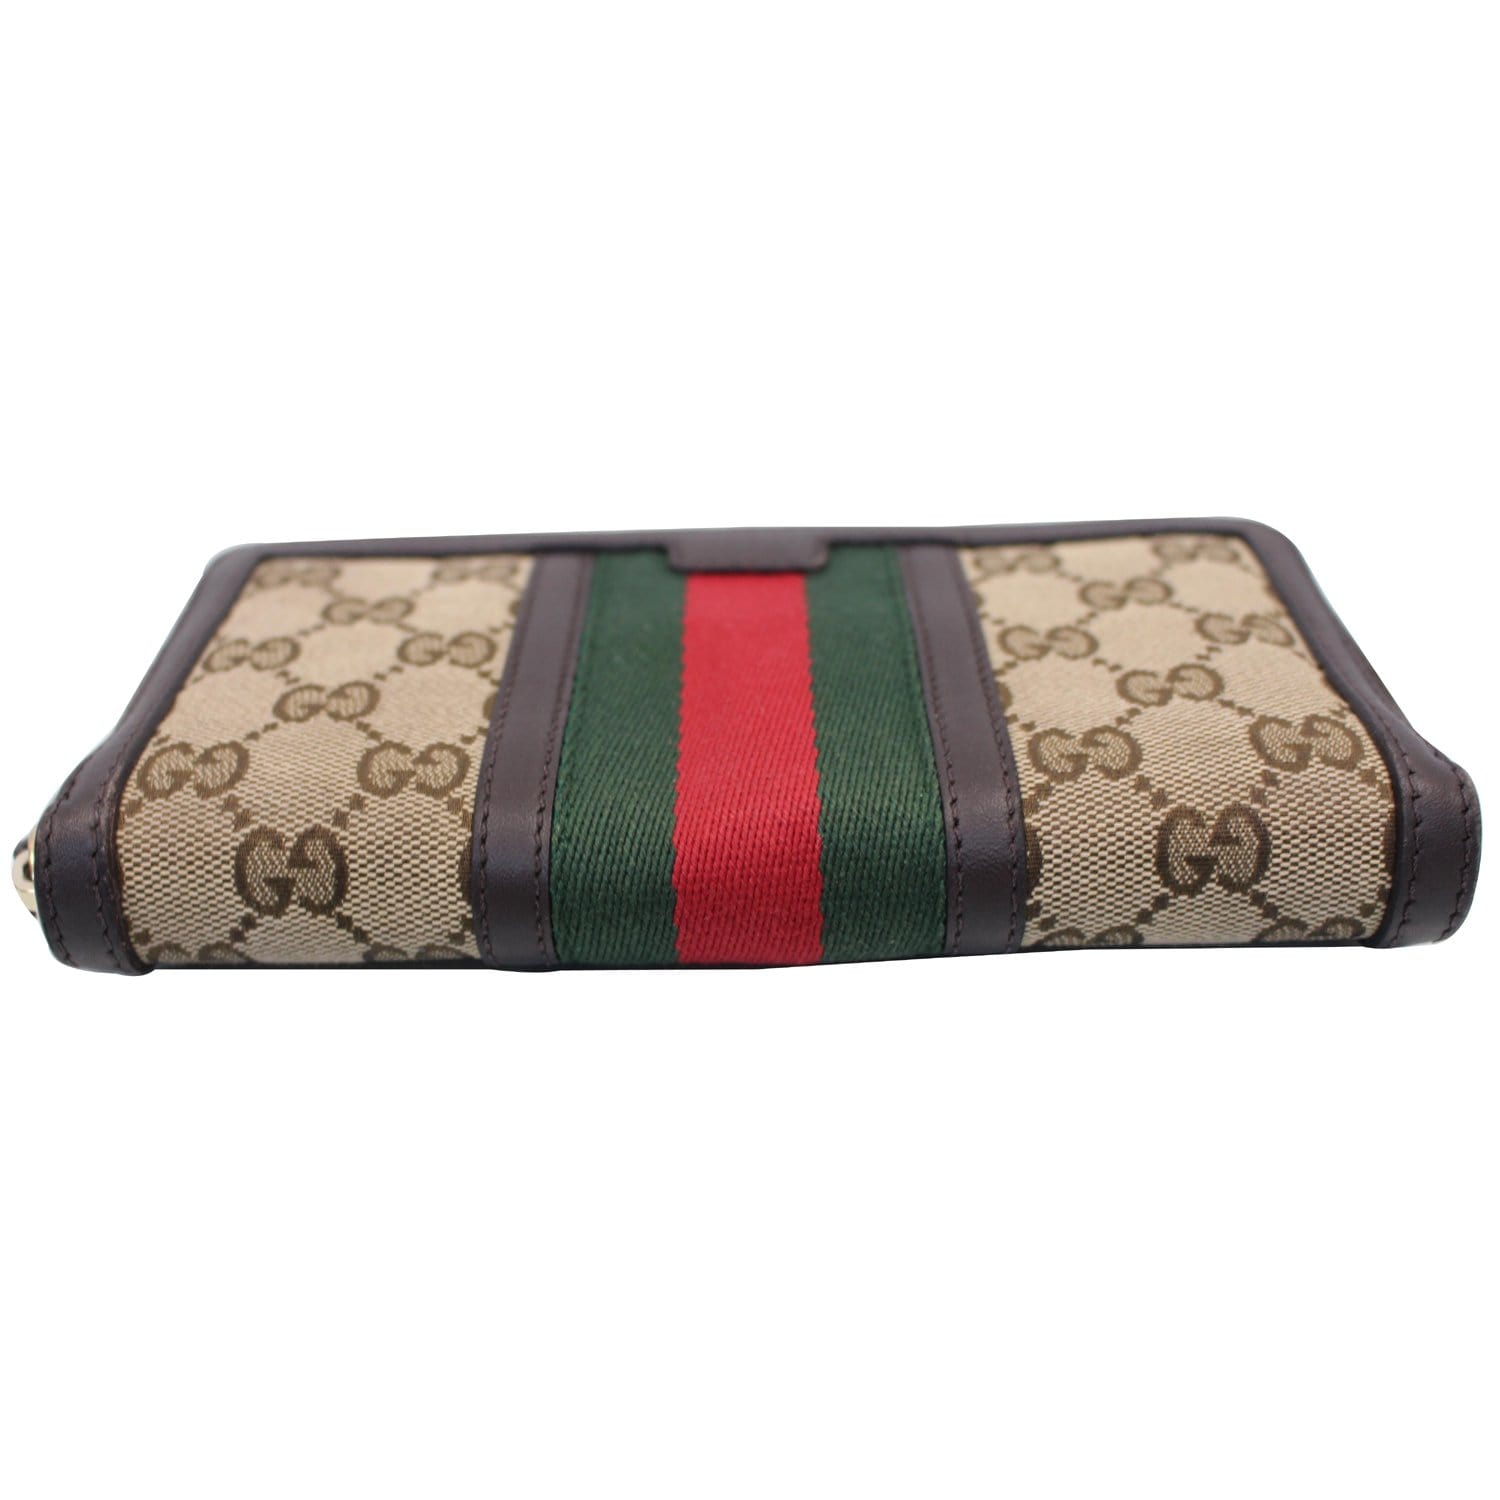 🔥RARE Vintage GUCCI Wallet Checkbook Cover Accessory Made in Italy 🇮🇹